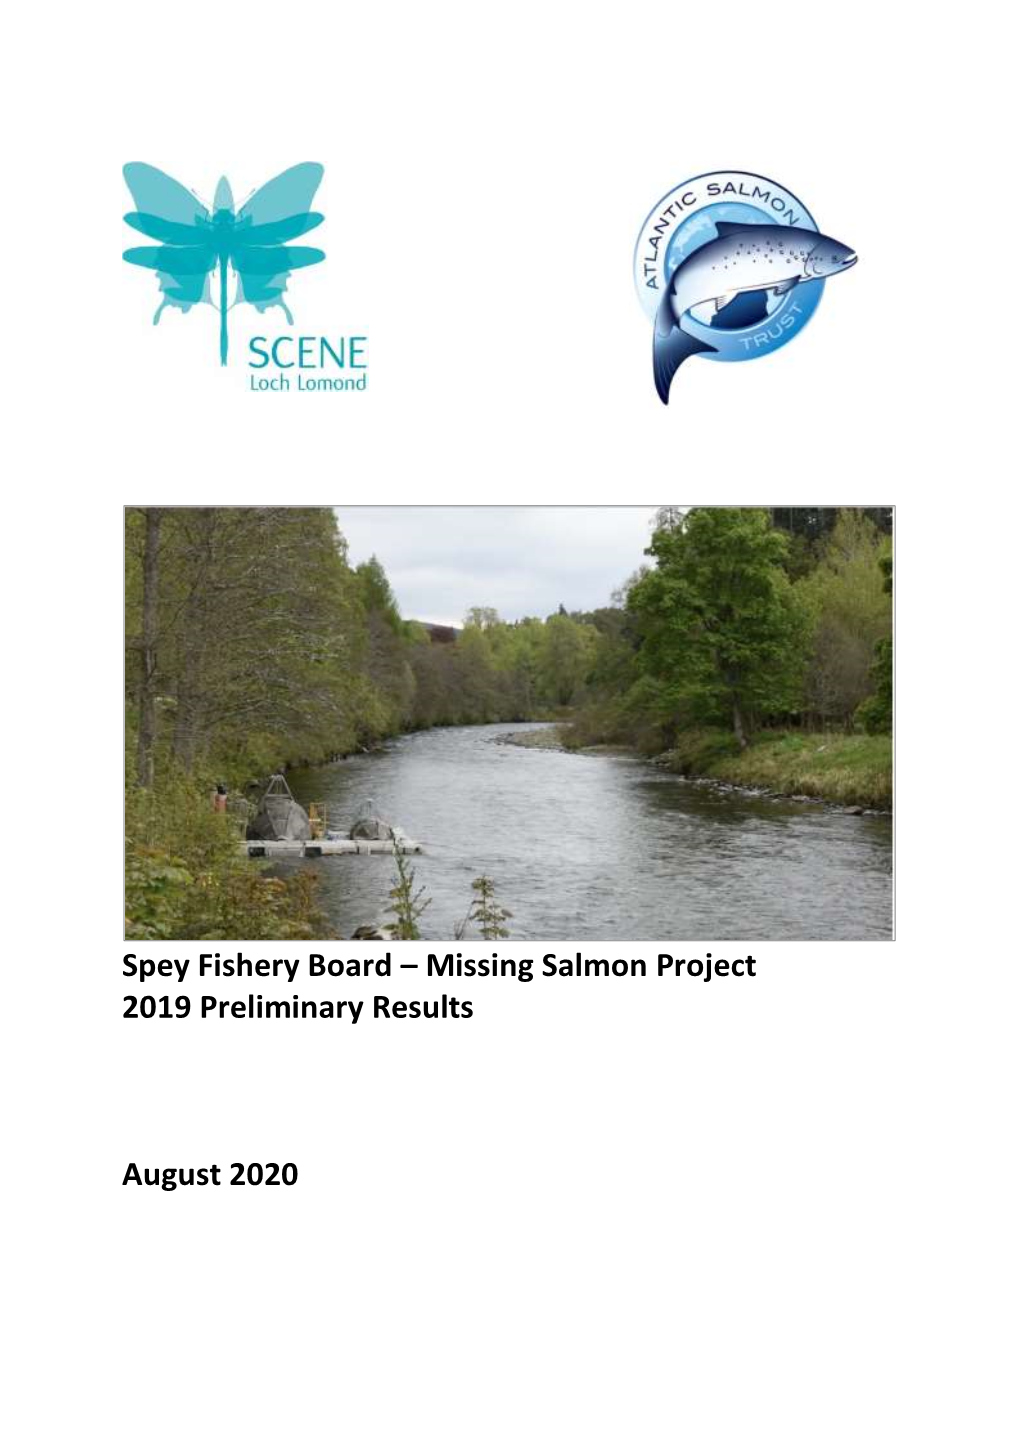 Missing Salmon Project 2019 Preliminary Results